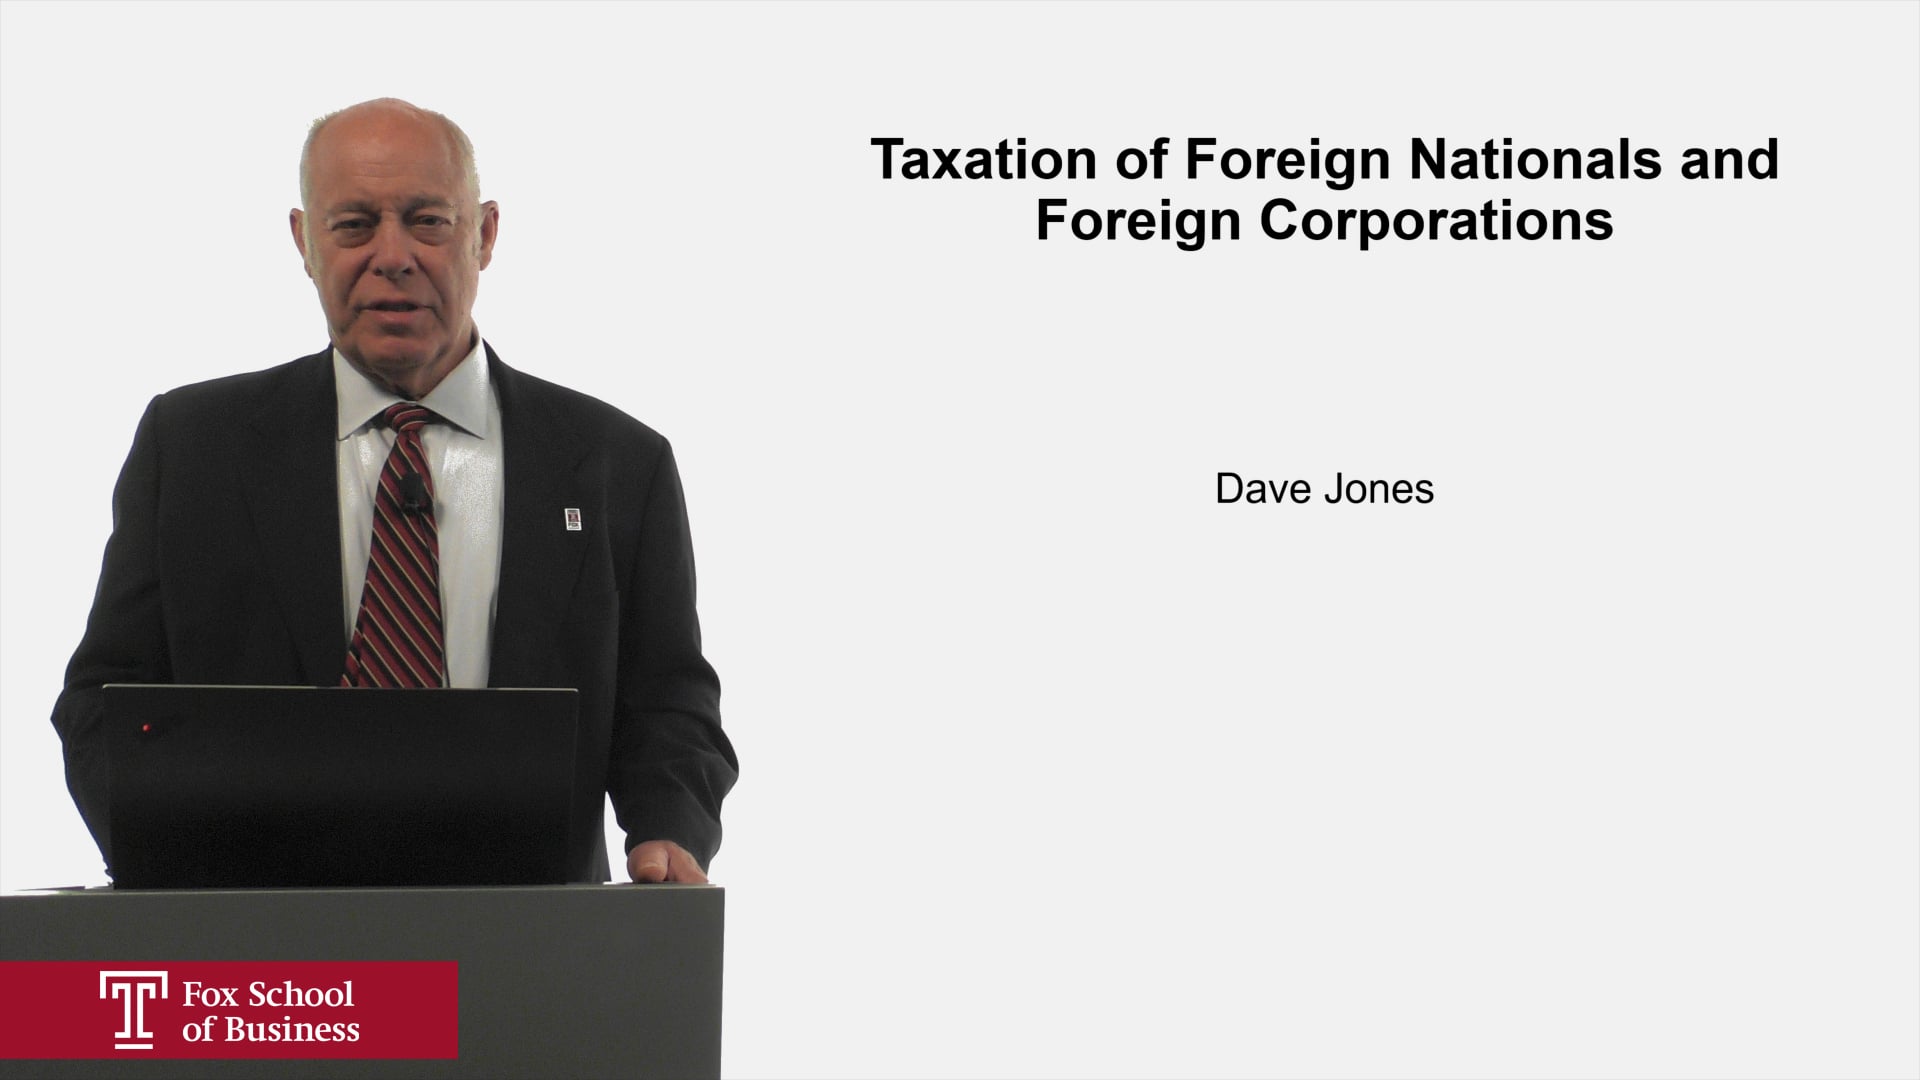 Taxation of Foreign Nationals and Foreign Corporations